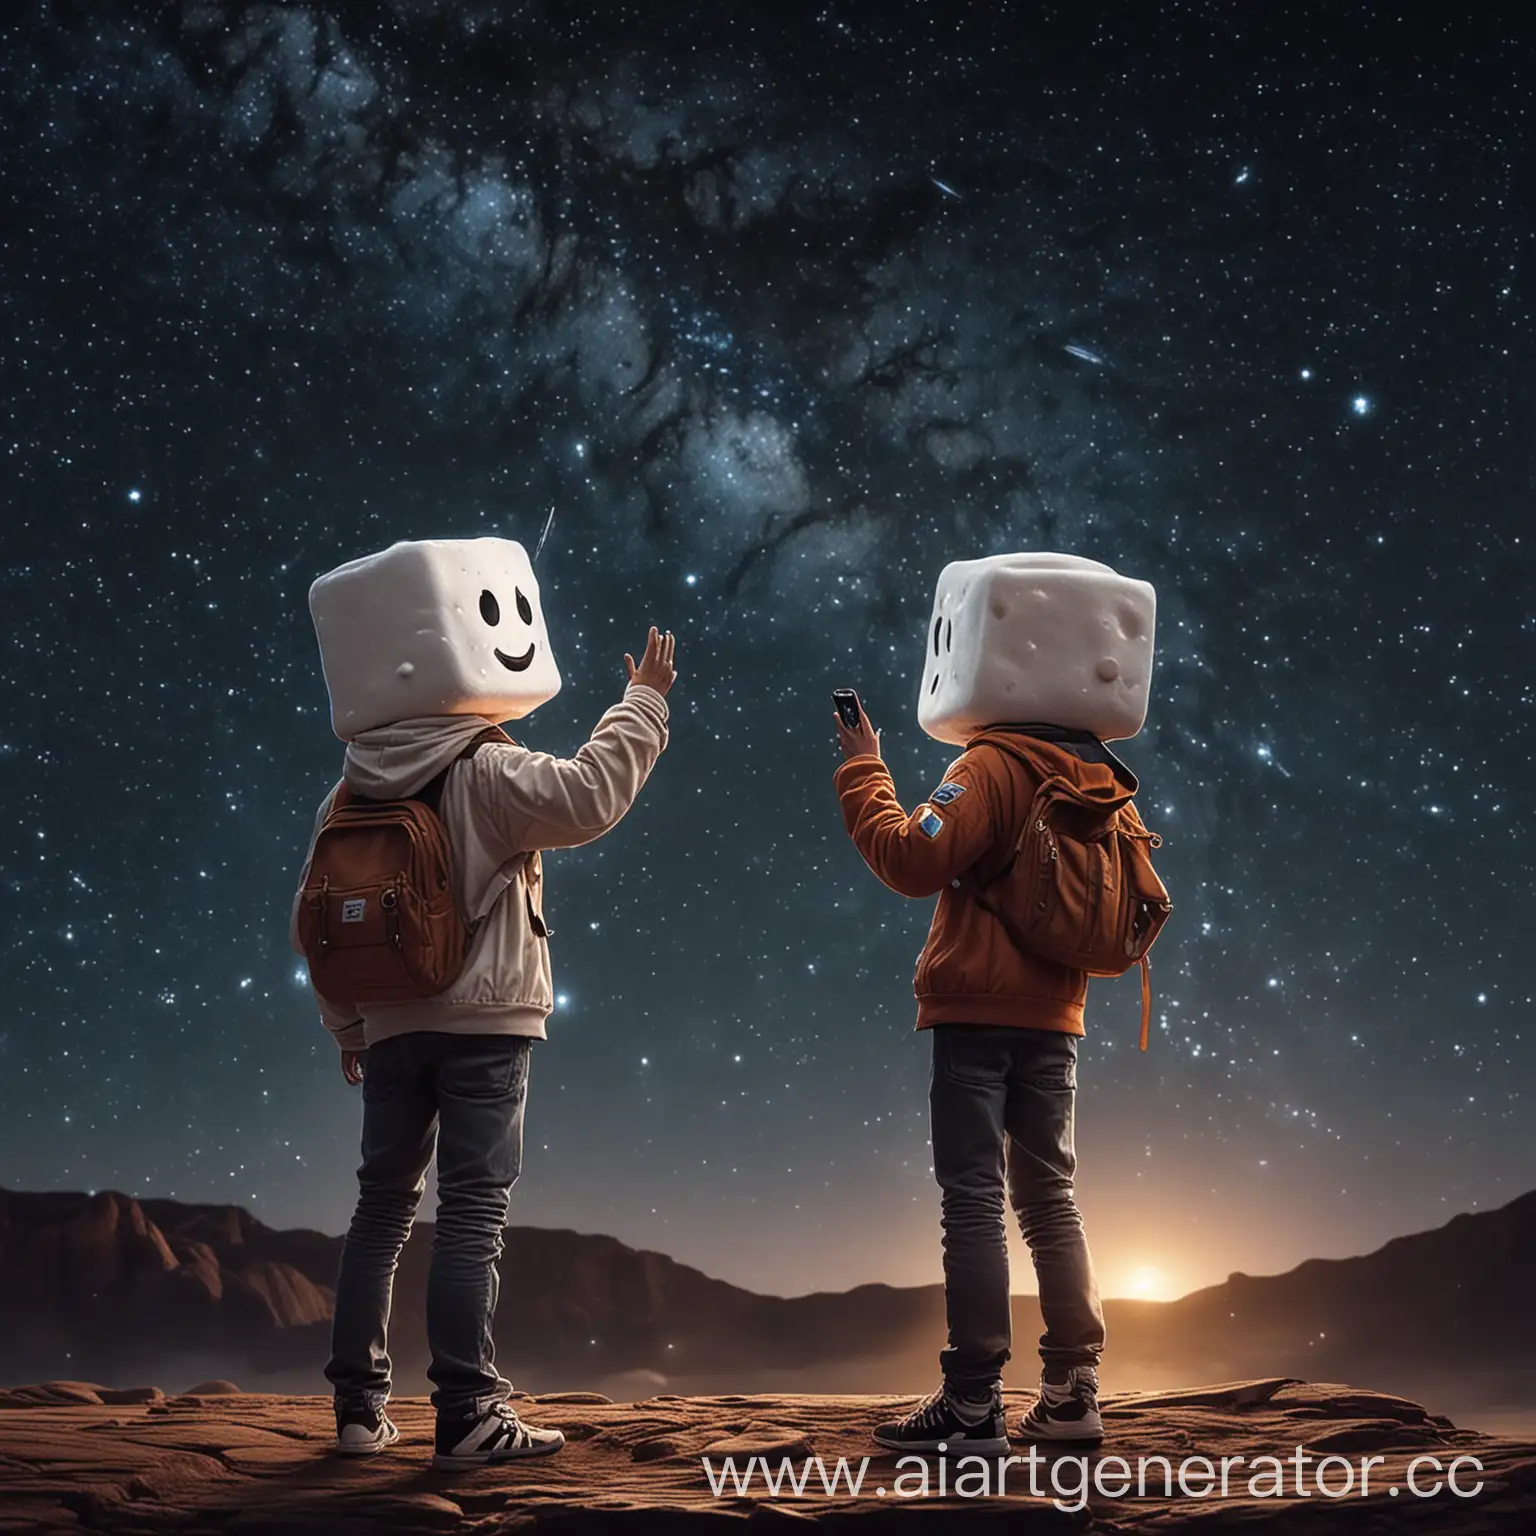 Friends-Gazing-at-Starry-Sky-with-Flying-DJ-Marshmello